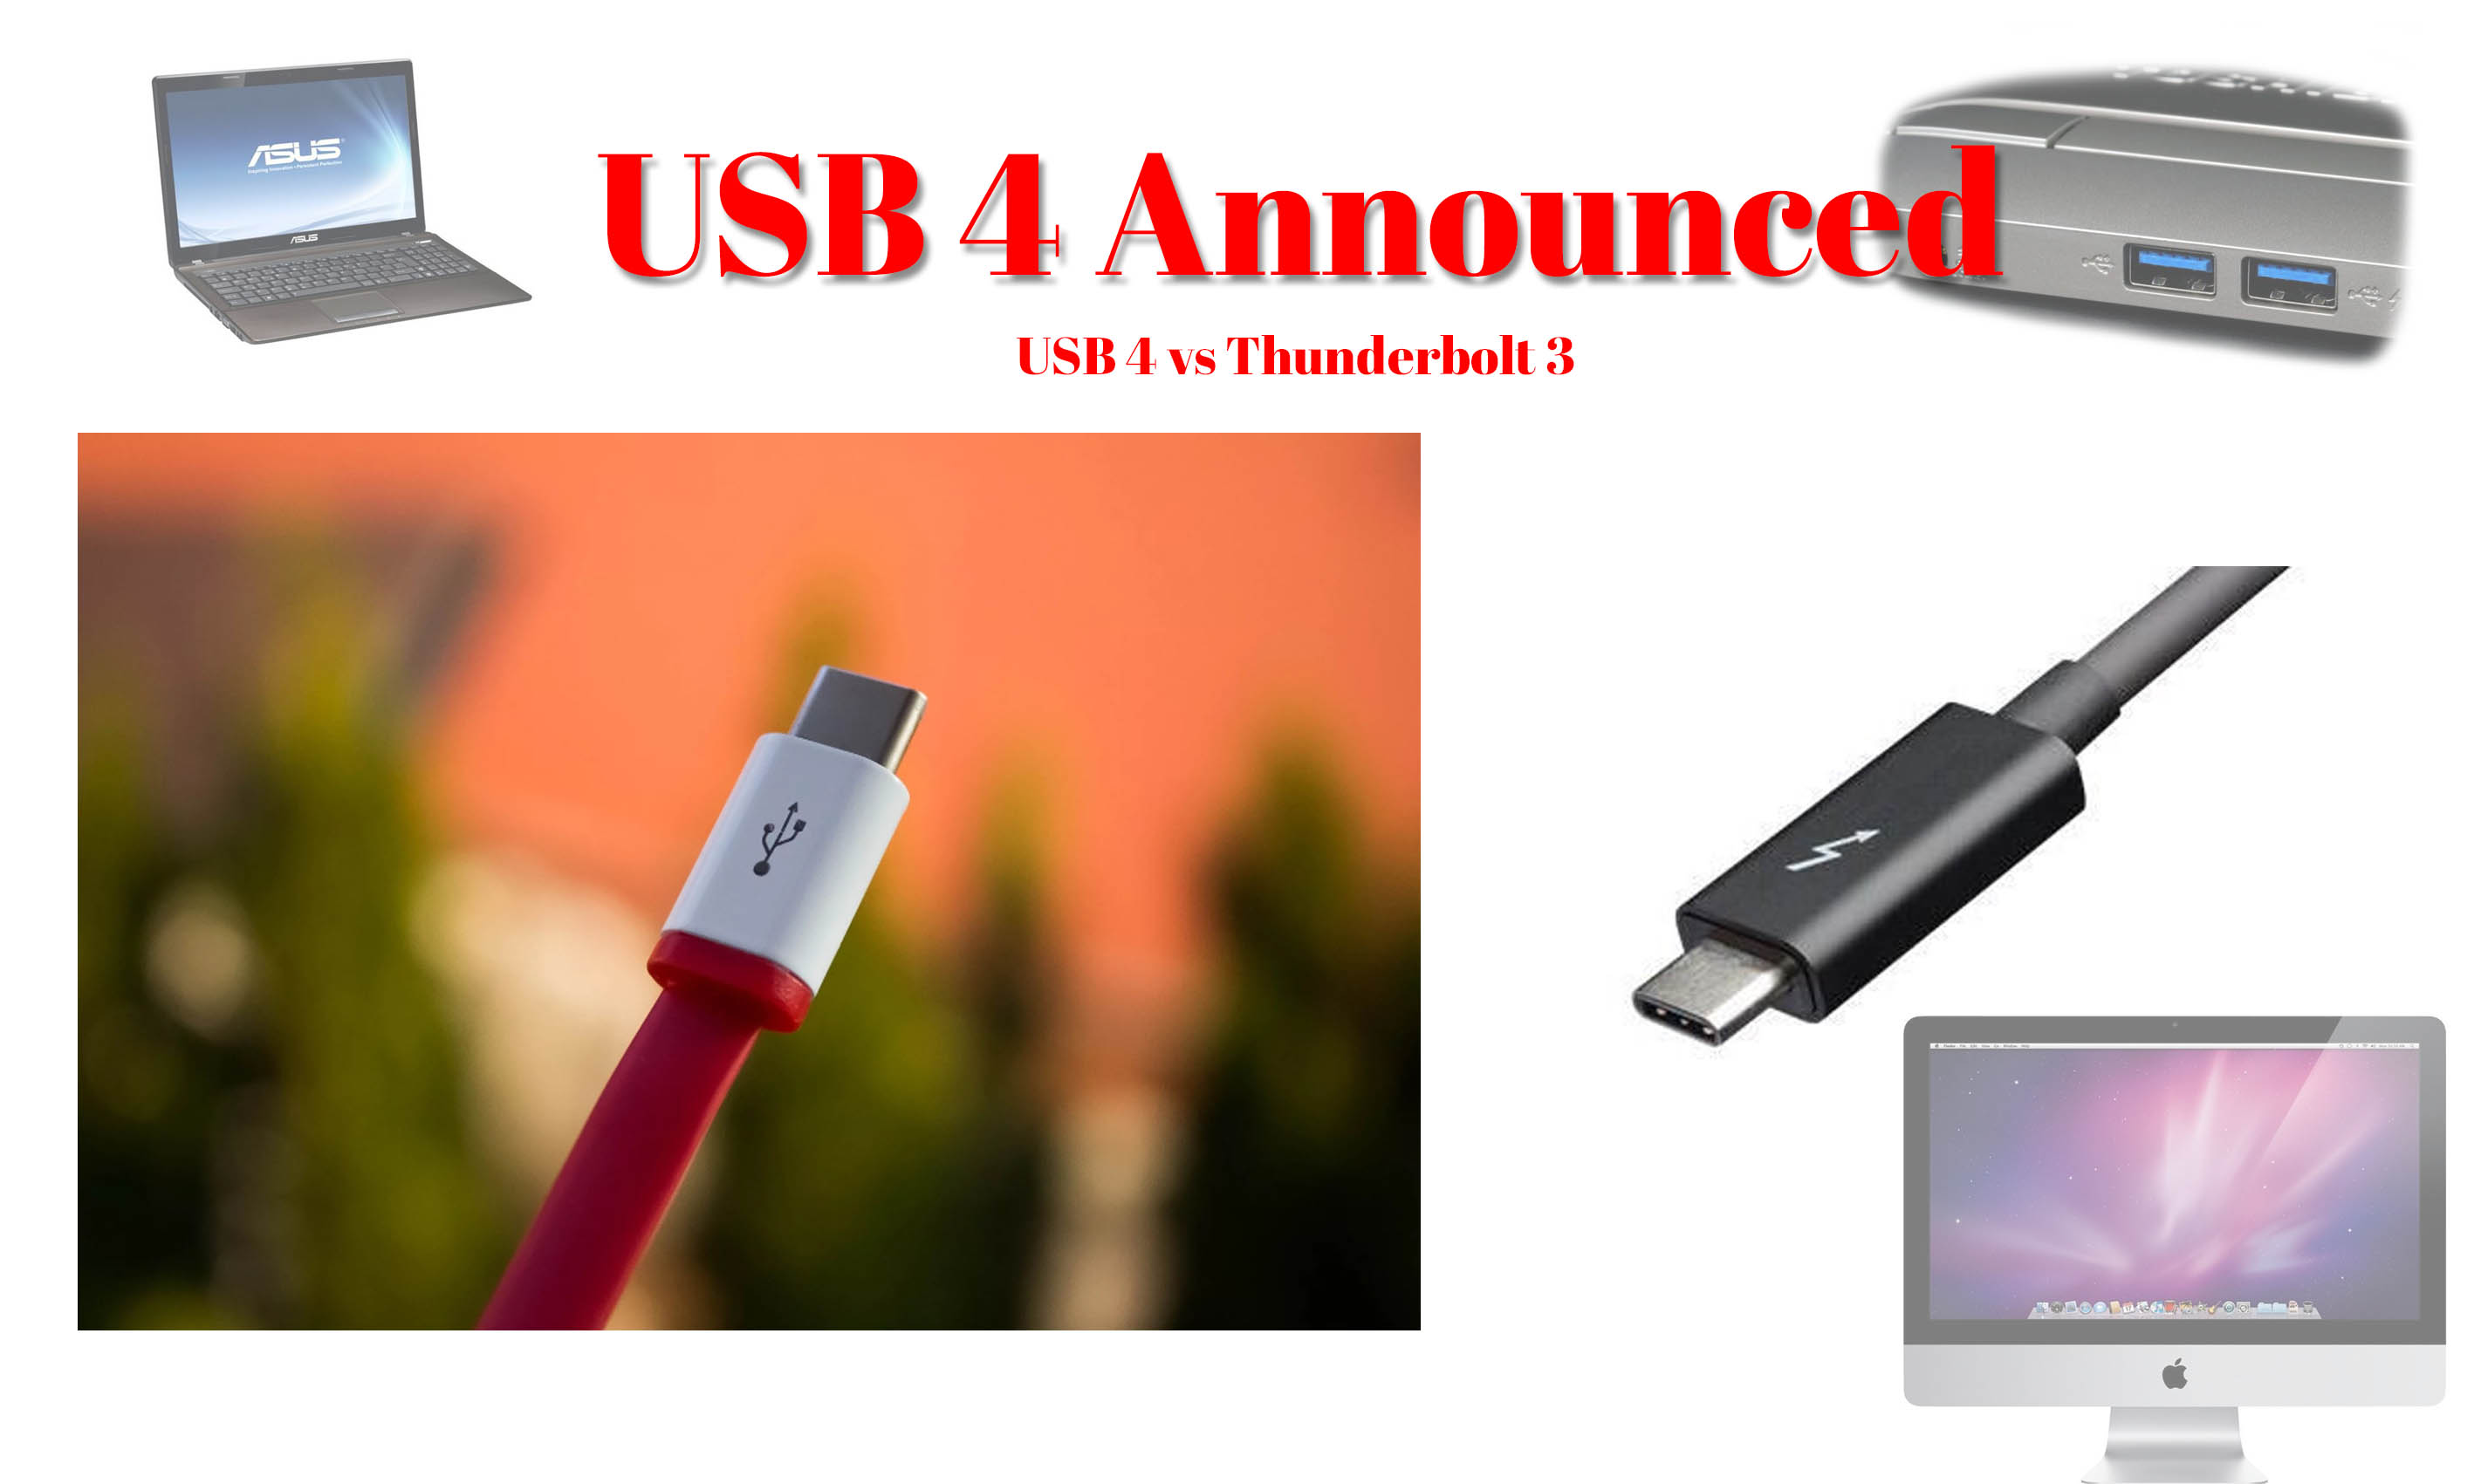 USB 4 Connectivity is officially announced